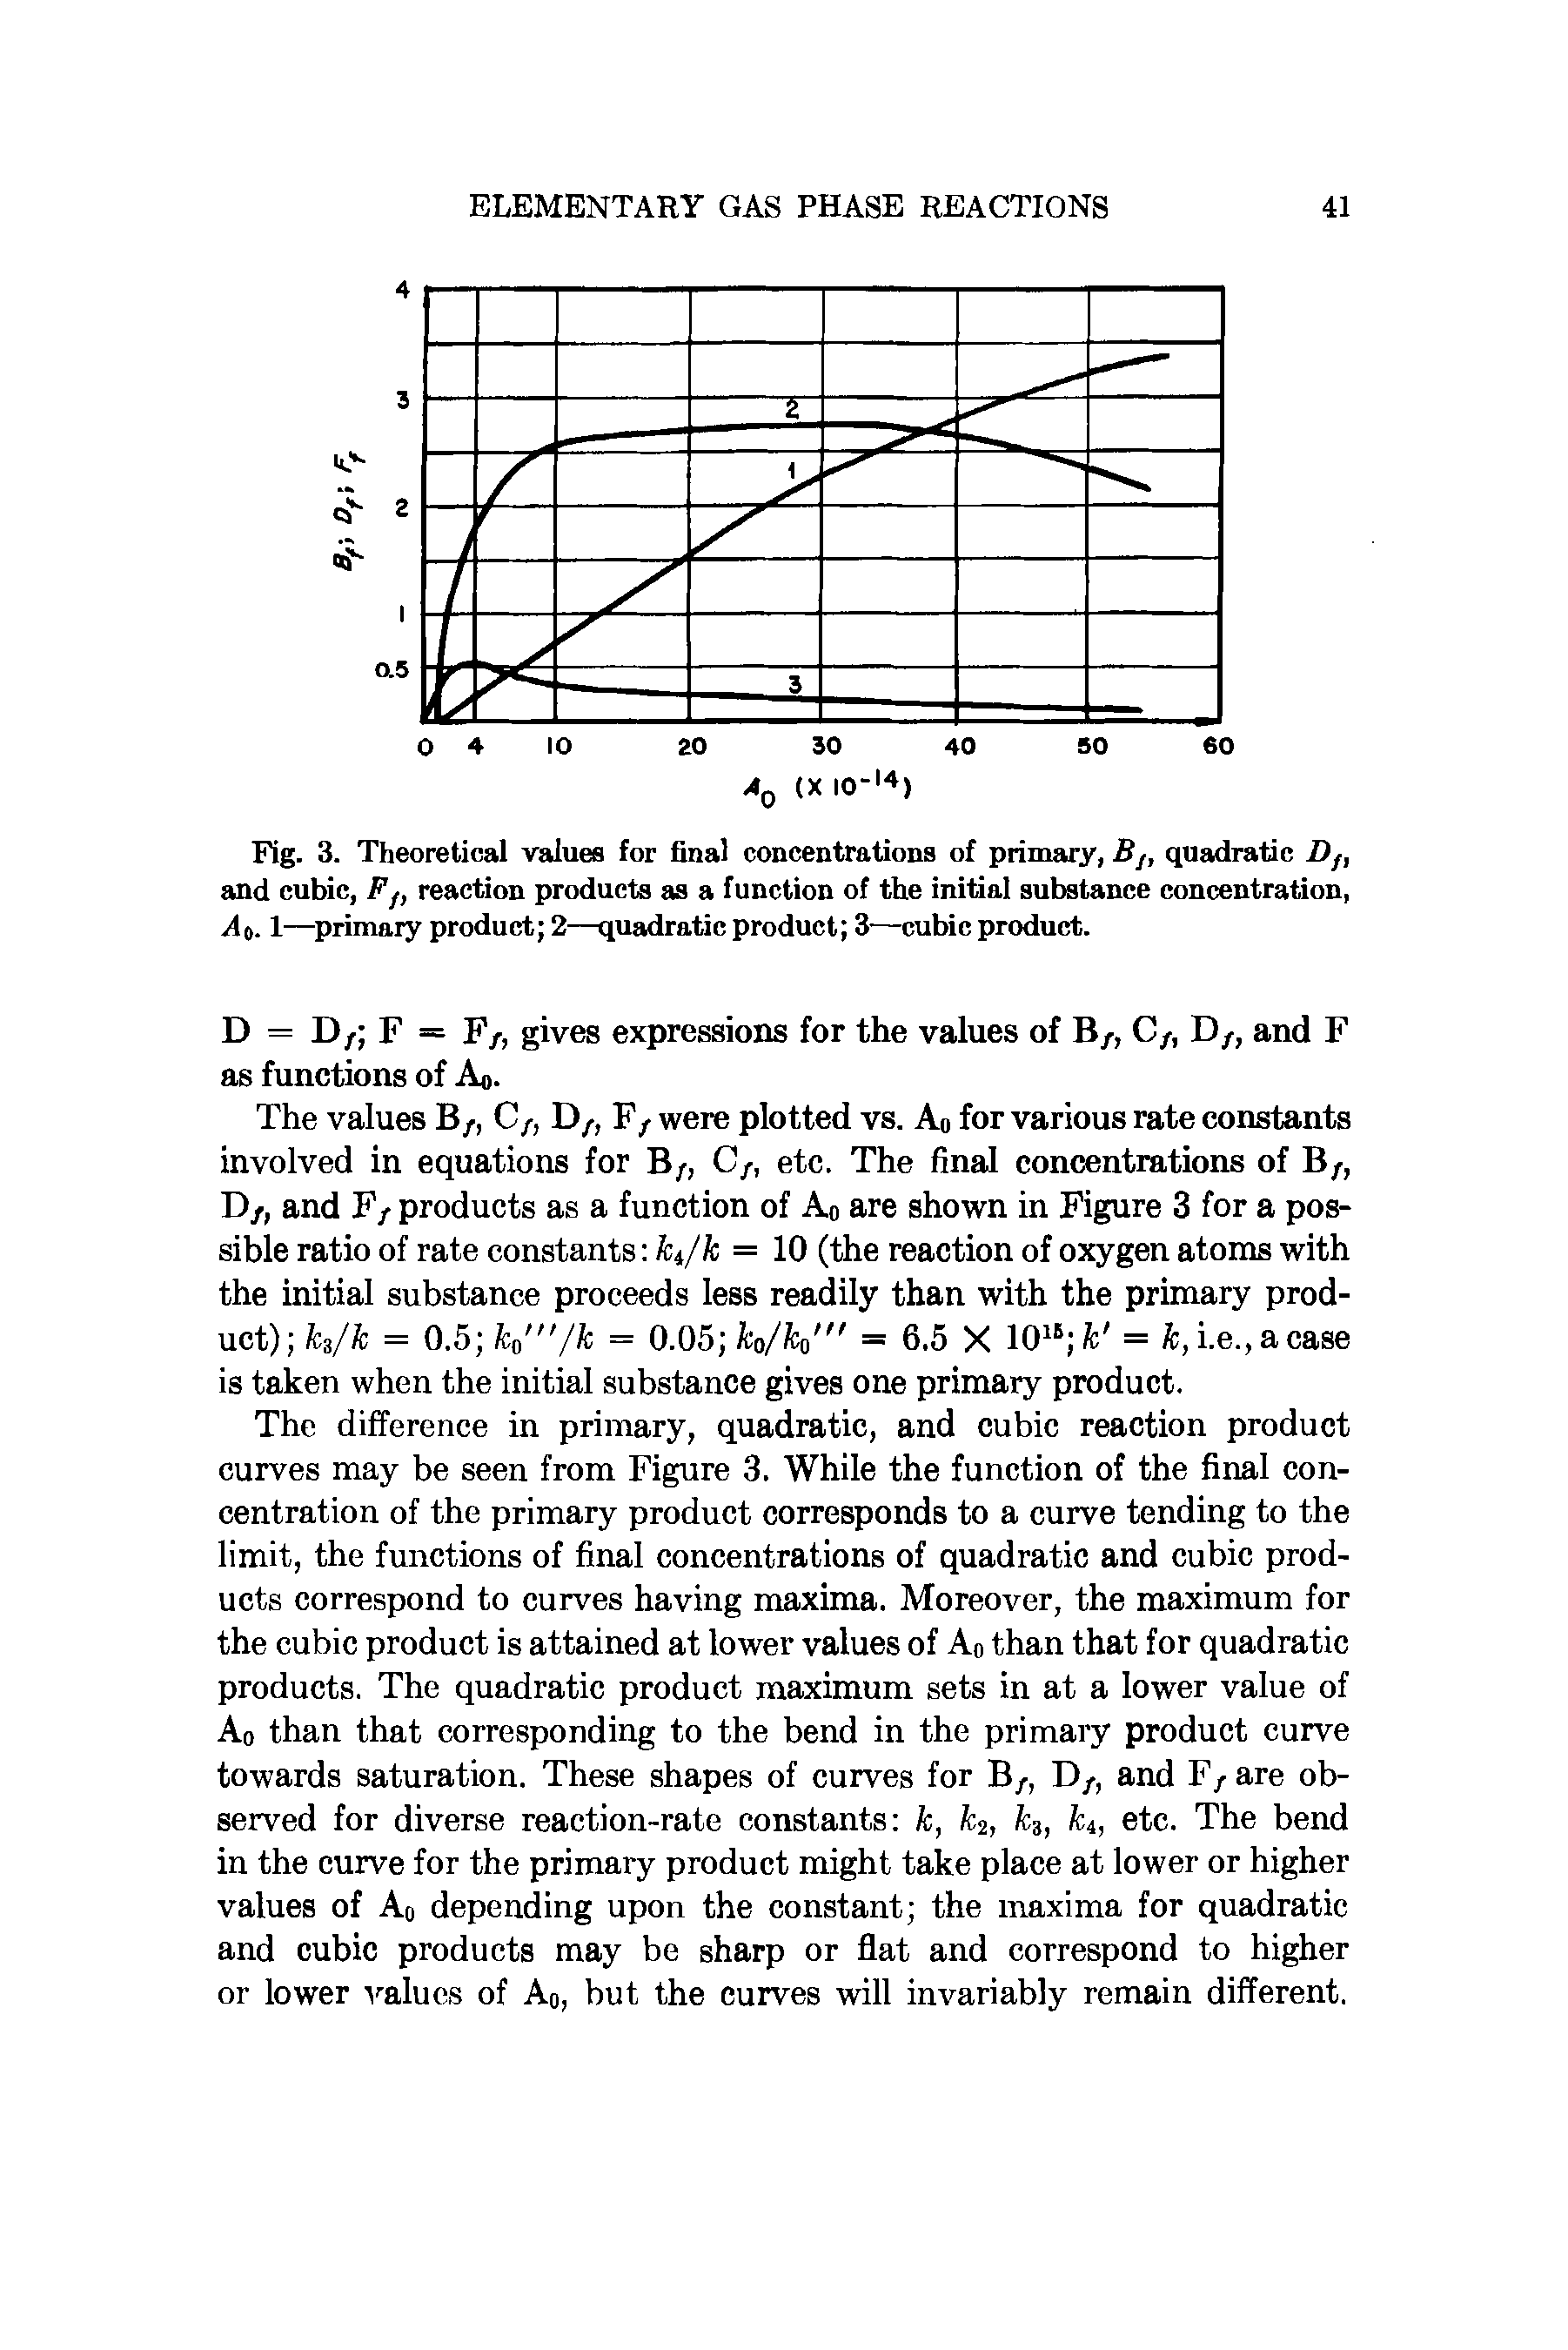 Fig. 3. Theoretical values for final concentrations of primary, Bj, quadratic Df, and cubic, Fj, reaction products as a function of the initial substance concentration, At,. 1—primary product 2—quadratic product 3—cubic product.